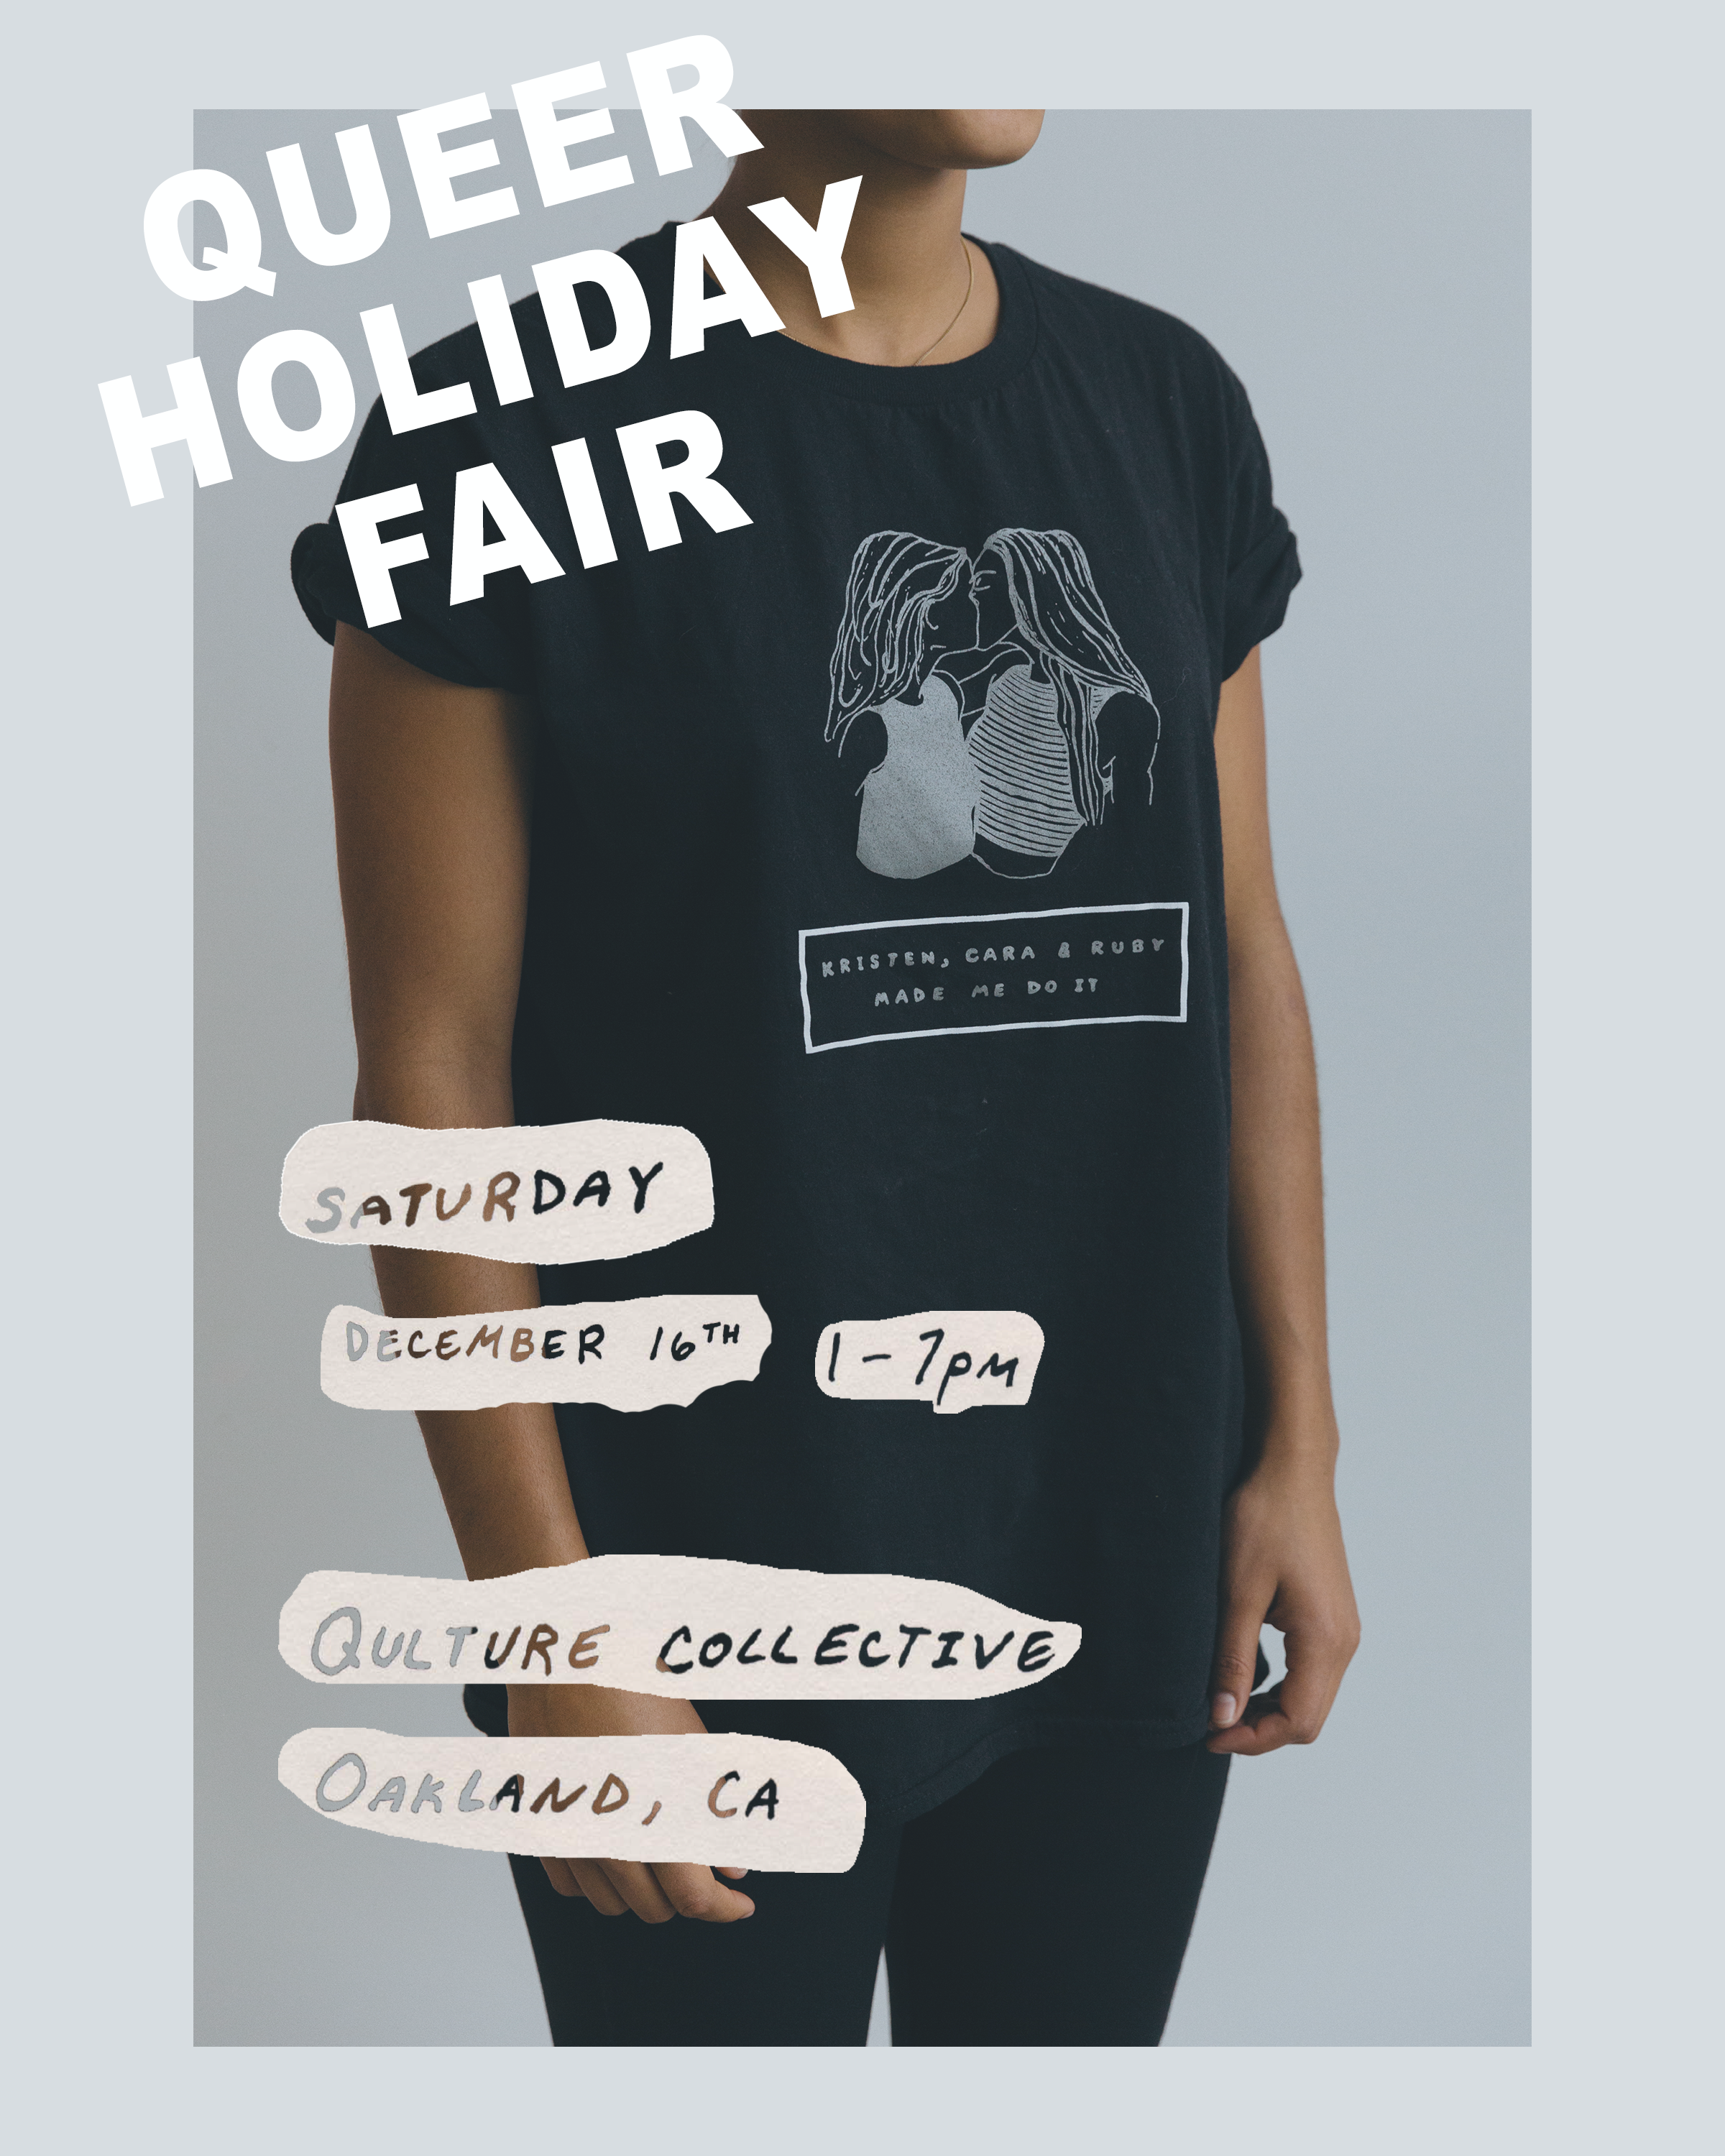 Queer holiday fair (event image)(ver 2).png